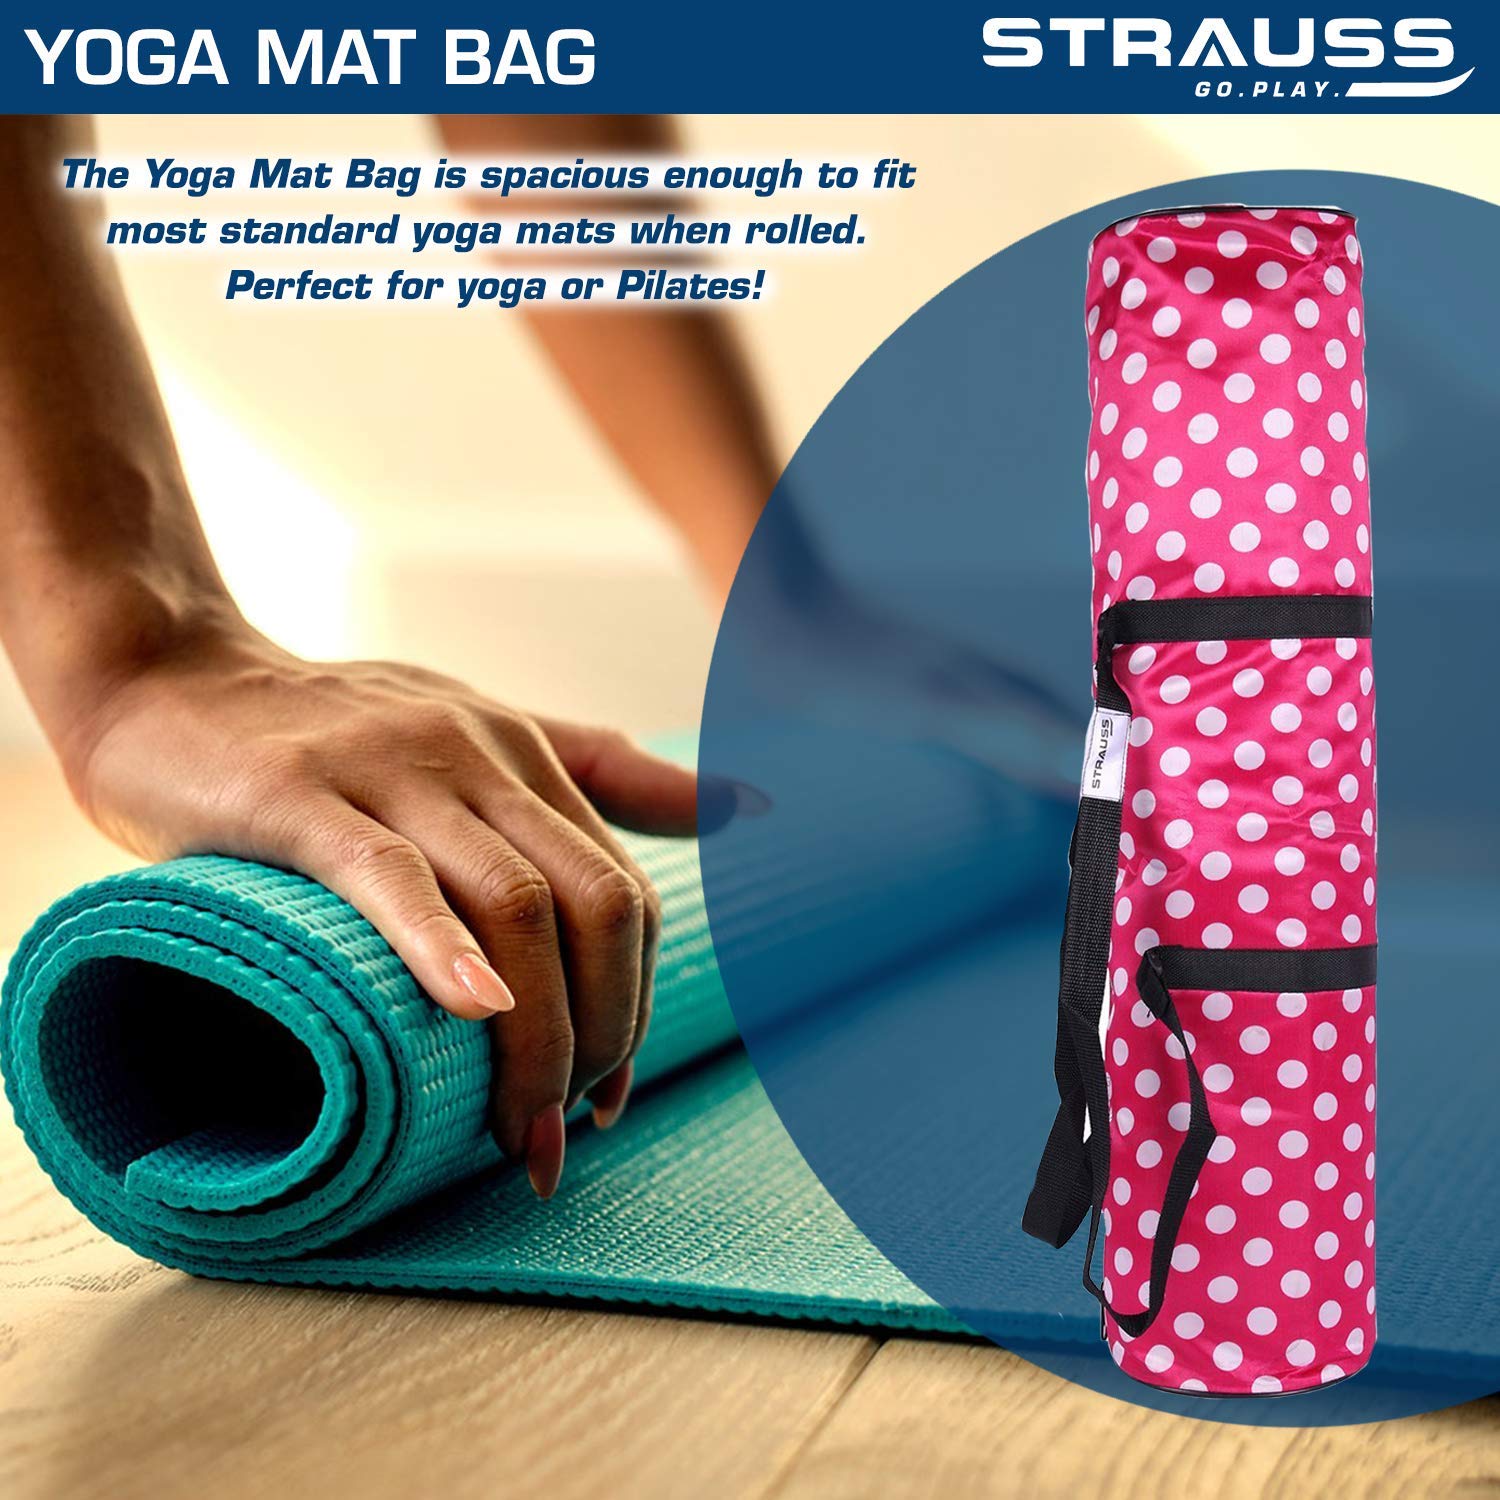 Strauss Yoga Mat 6MM,(Floral Blue) and Cooling Towel, 80 cm, (Blue)